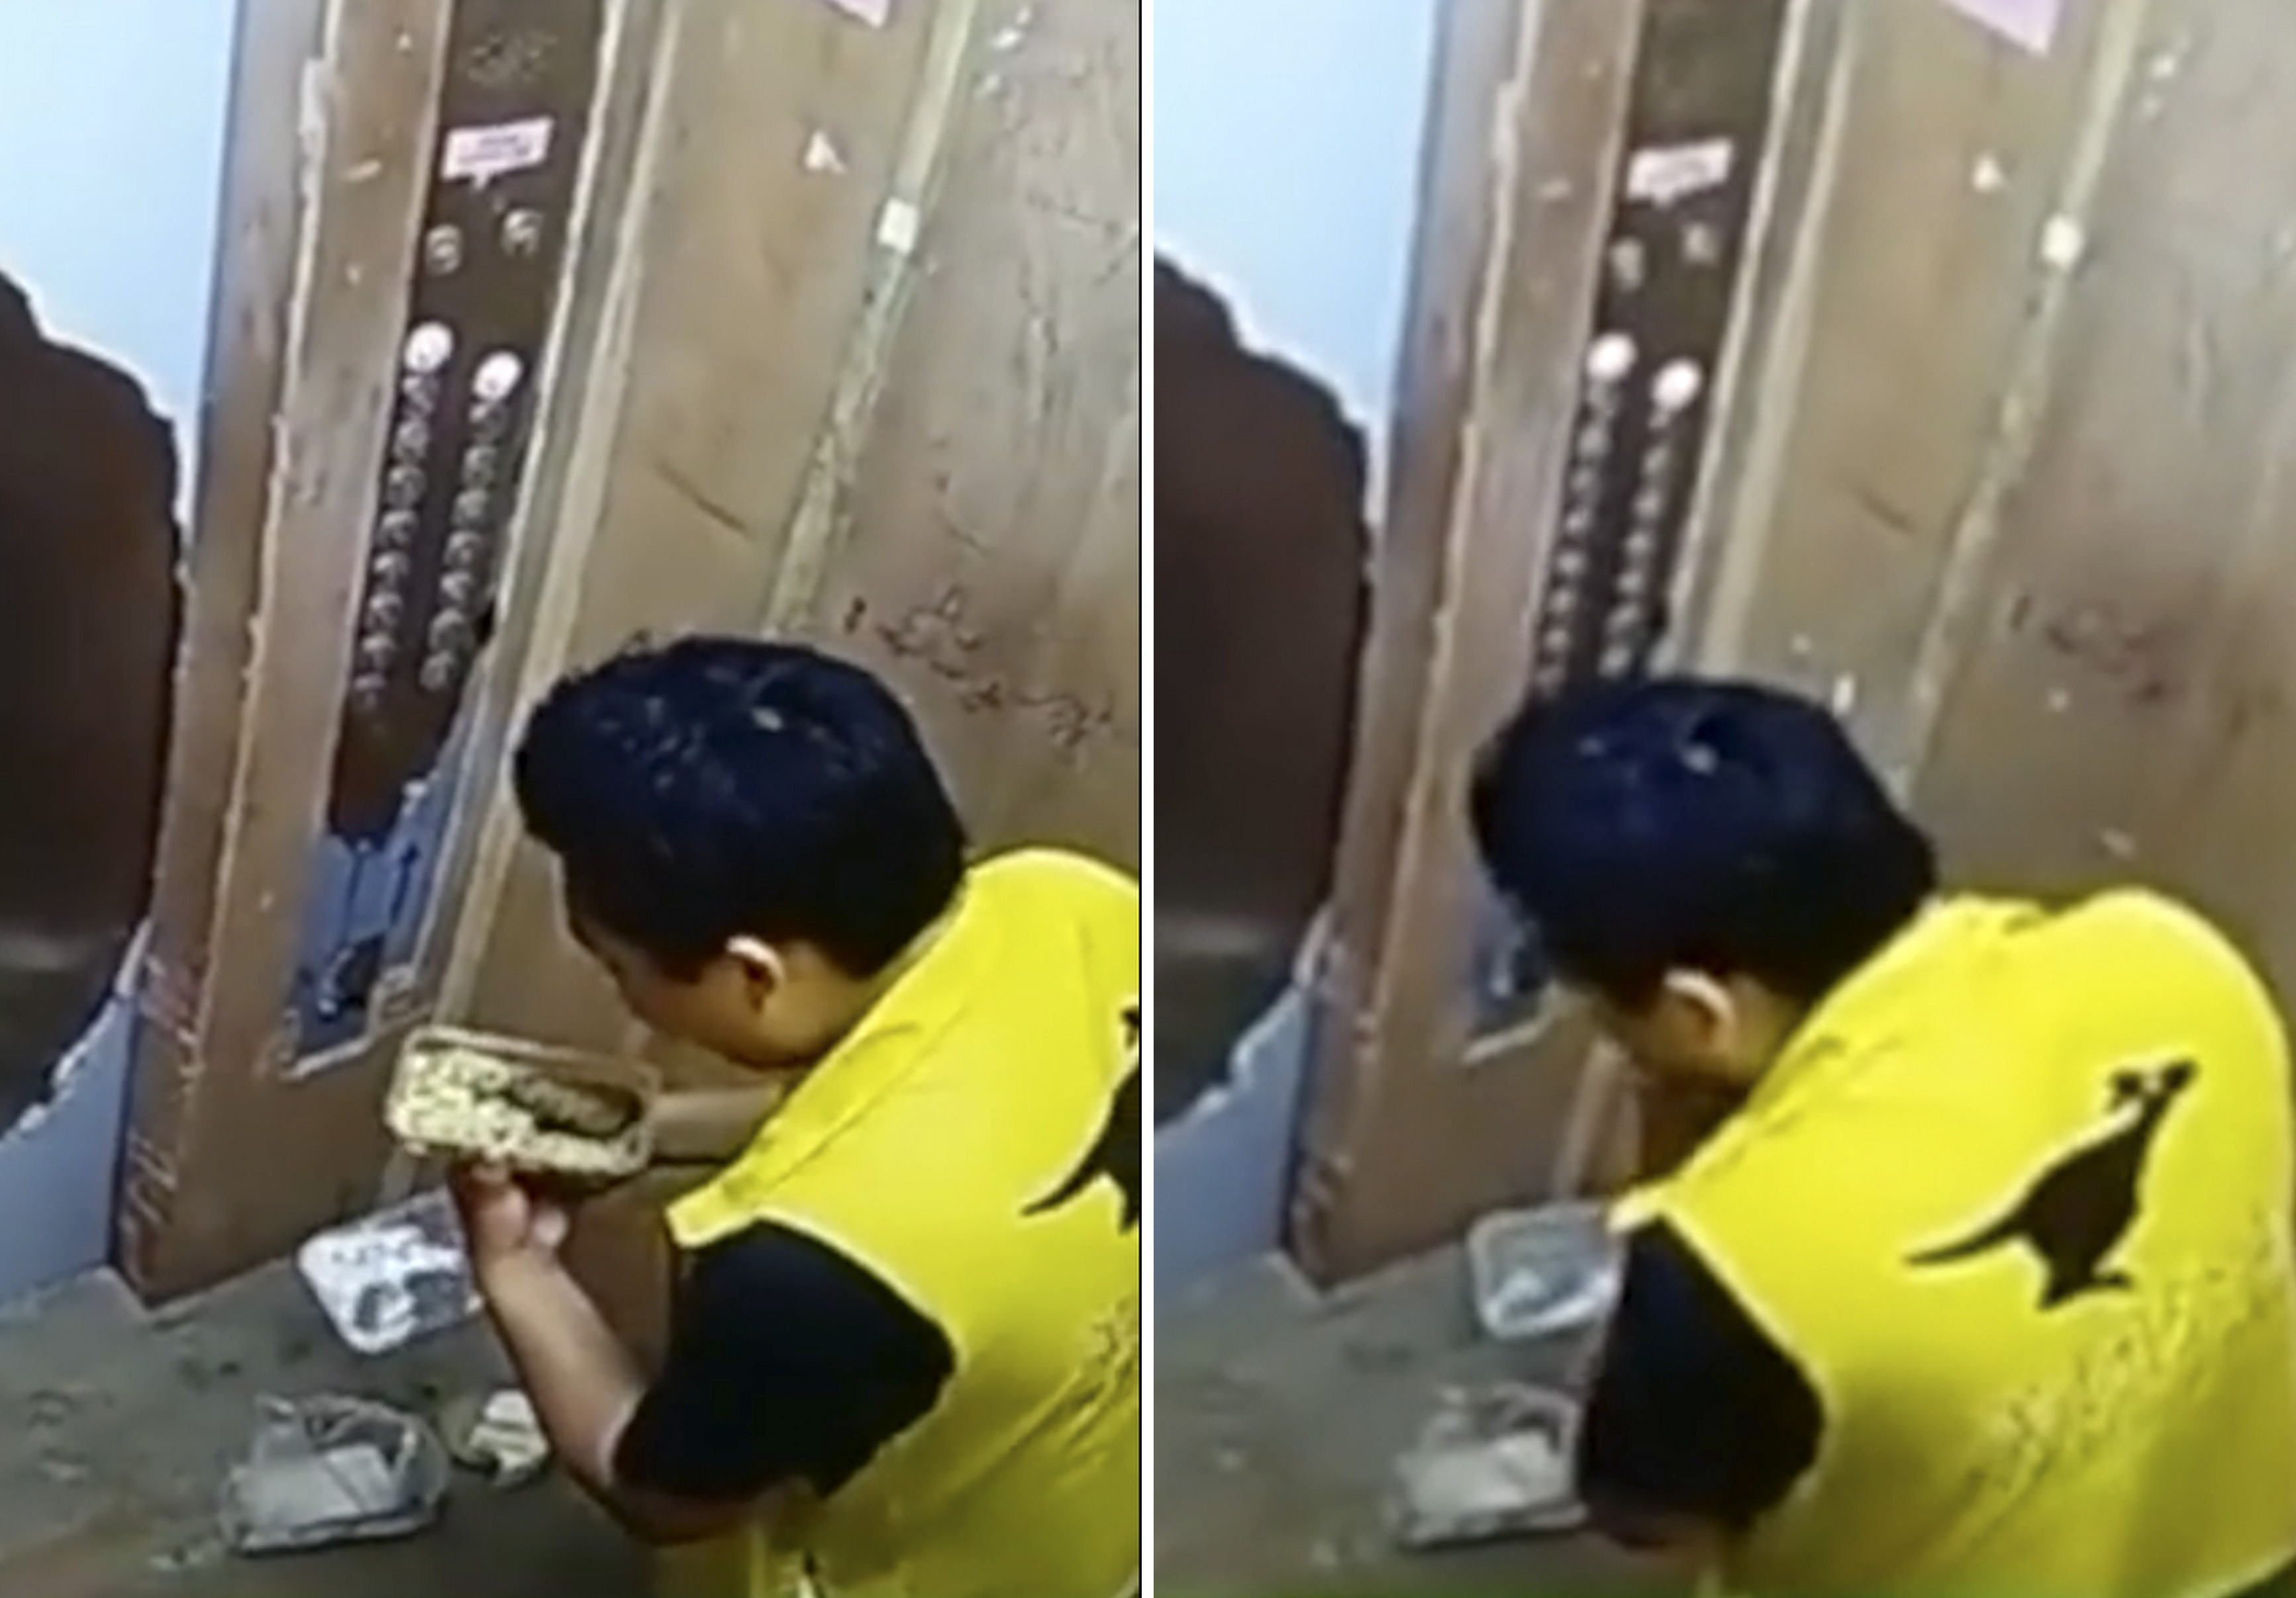 The delivery man was filmed on CCTV eating in the lift. Photo: ifeng.com